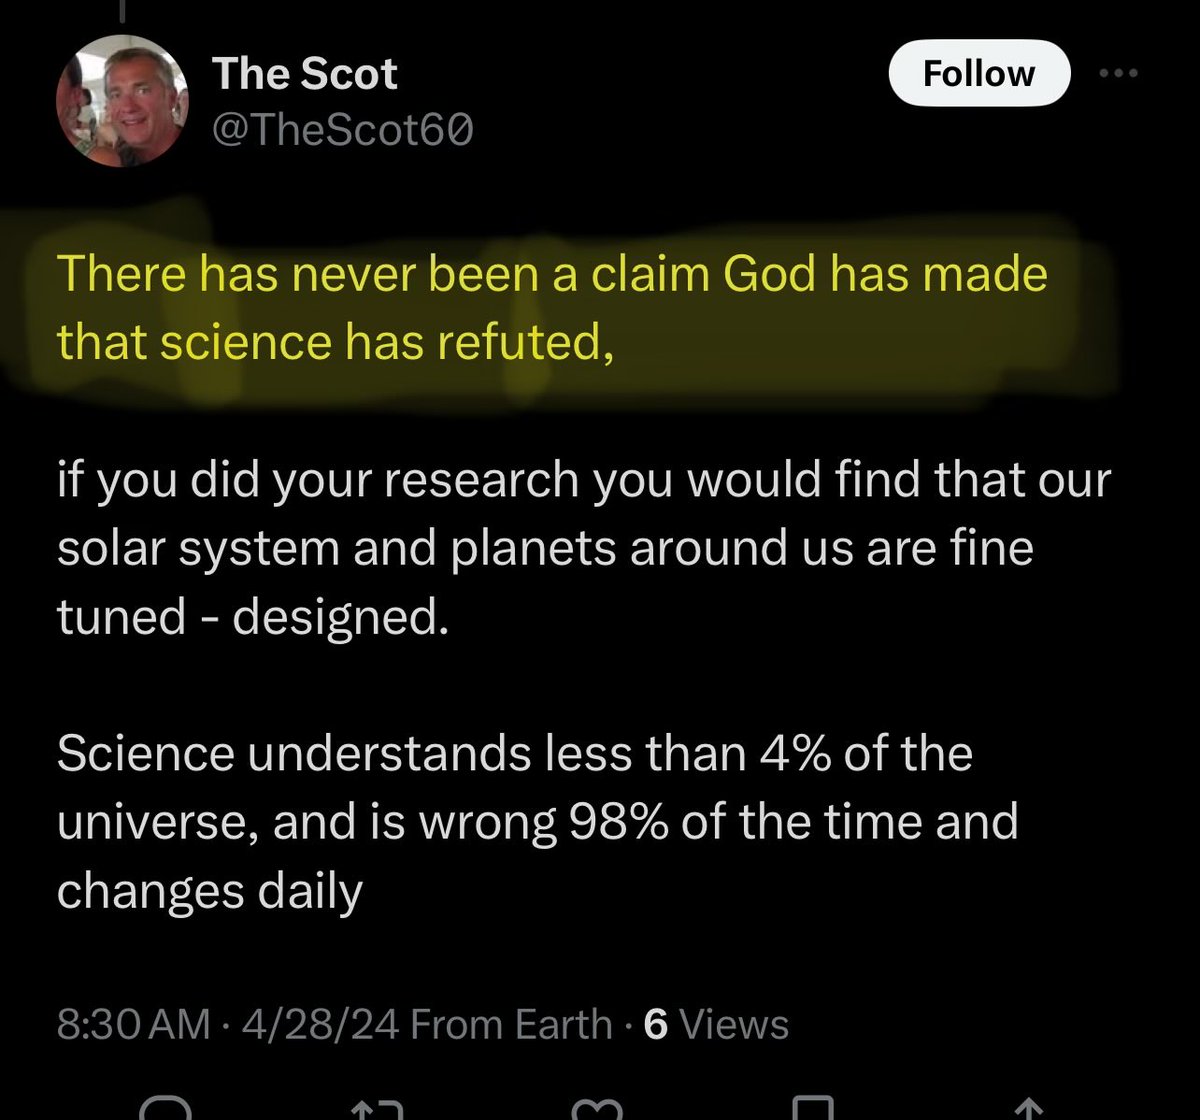 This one struck me so funny this morning. As if god has EVER made a claim & it wasn’t just some guy claiming to speak for god. Not only that, but scientifically the Bible is a clown show. Science demolishes biblical claims particularly claims to cosmology. Poor deluded Scot.😂